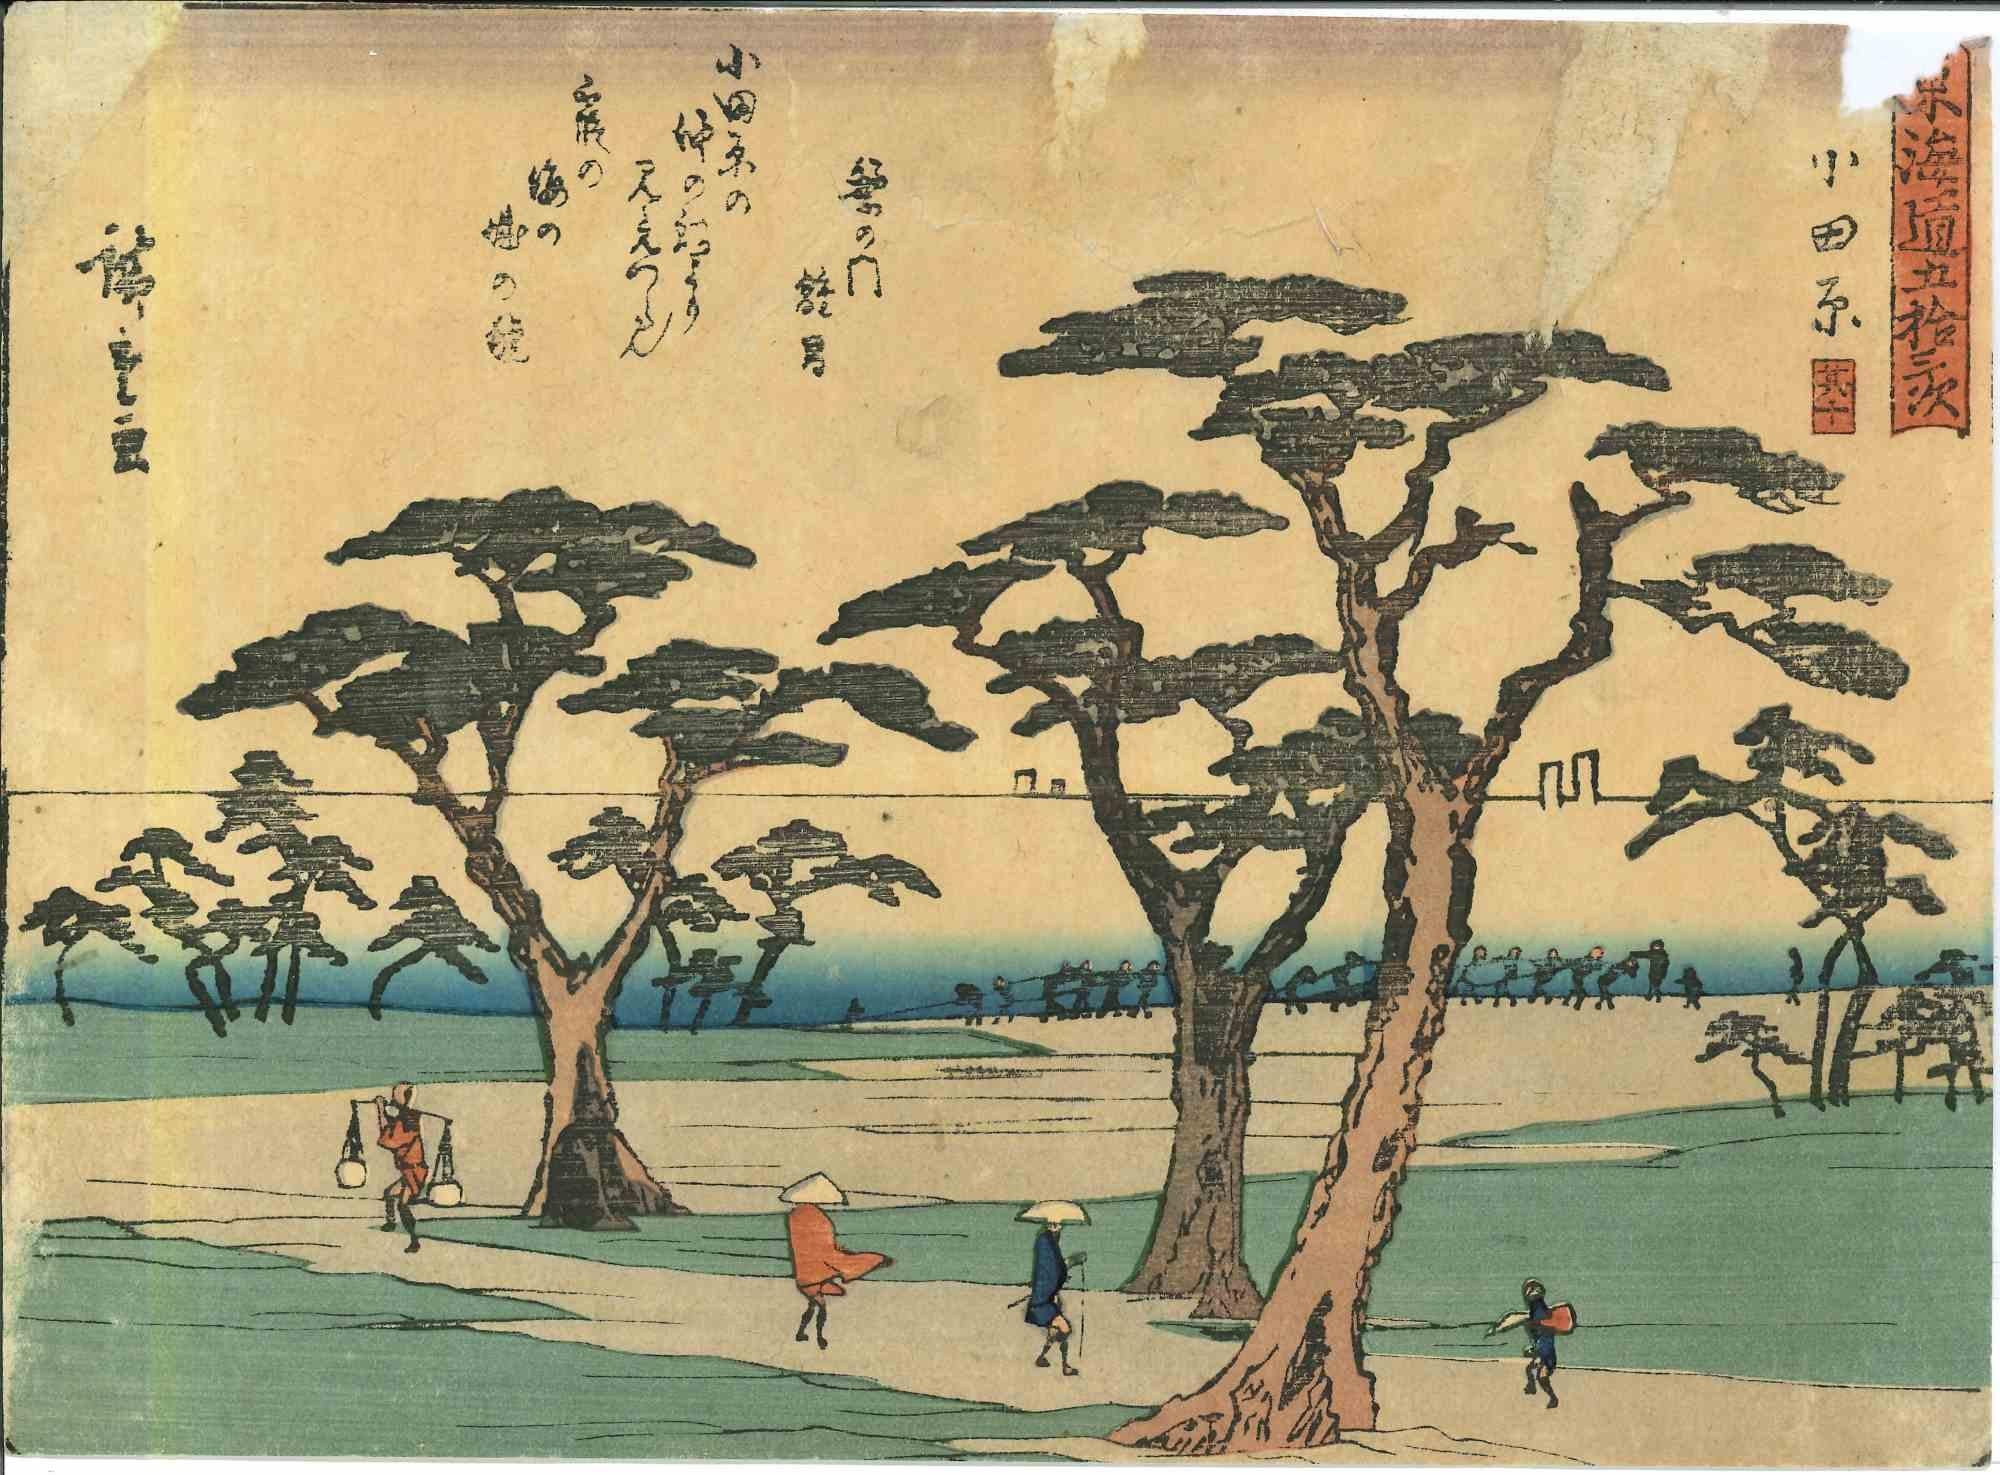 Odawara is a superb polychrome woodblock print (ink on paper) by Utagawa Hiroshige (Japanese, 1797-1858). From the print series “Fifty-three Stations Along the Tokaido Road (Tokaido Gosantsugi no tsugi).

Horizontal Oban. In fair condition, with